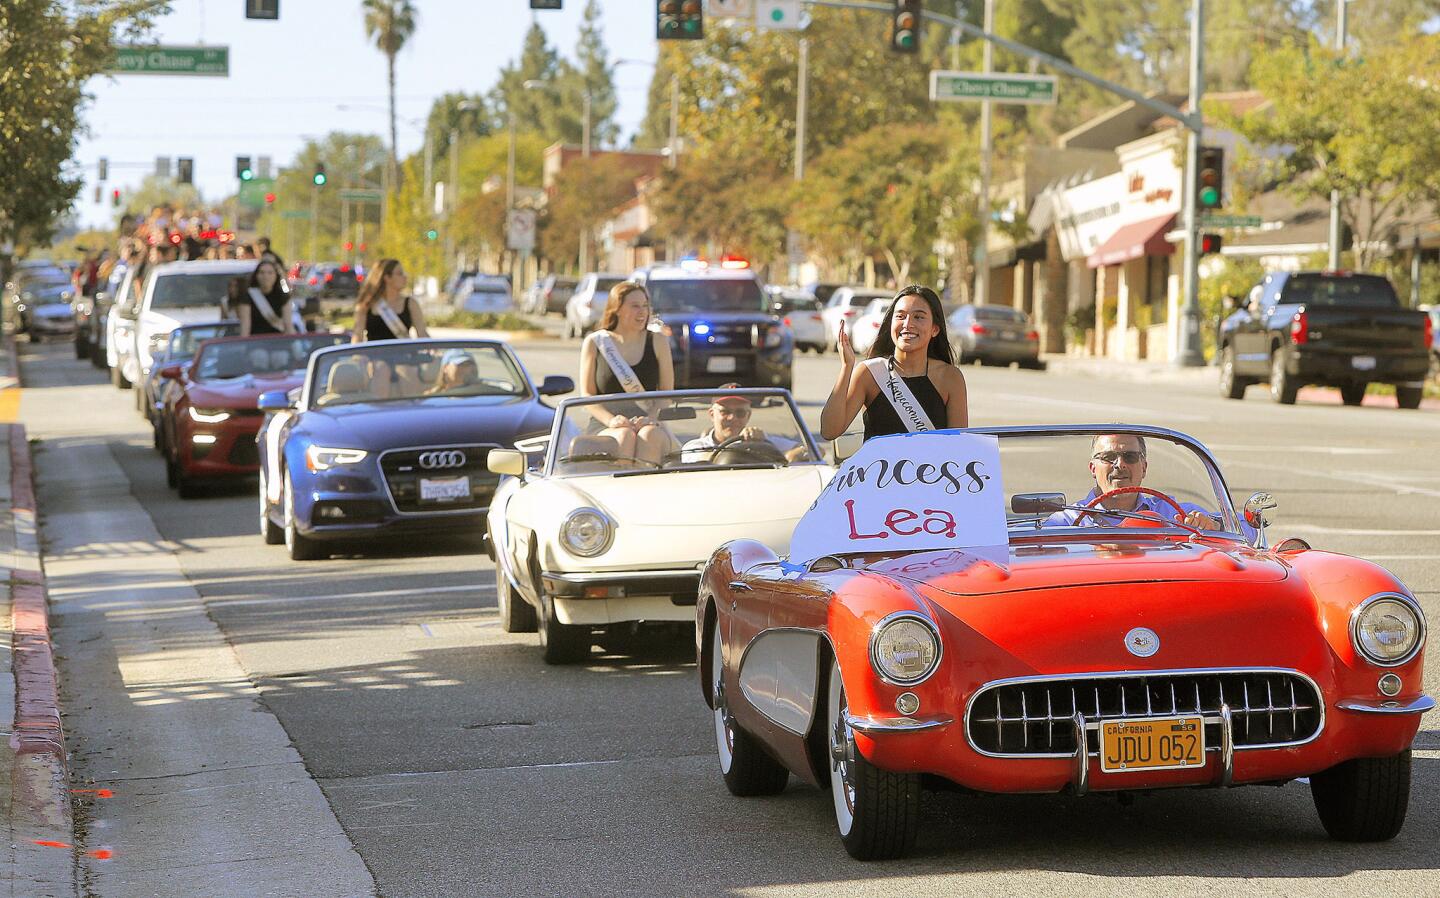 The homecoming parade on Foothill Blvd. for La Canada High School on Friday, October 19, 2018. Later in the evening, the homecoming king and queen will be announced at halftime of the homecoming football game being played against South Pasadena.